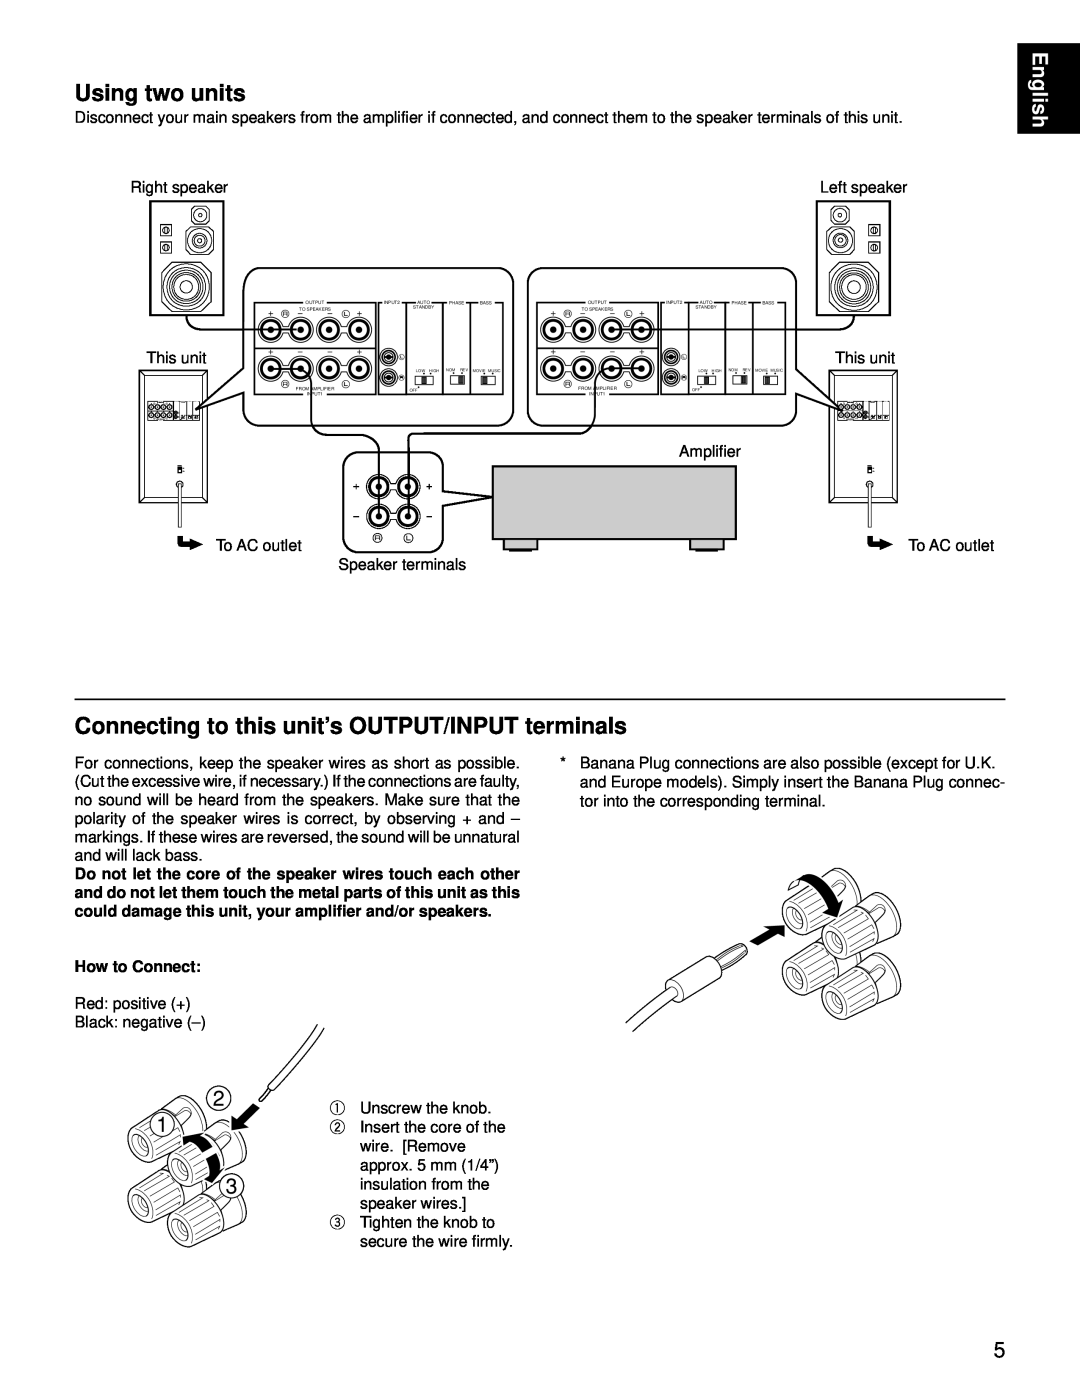 Yamaha YST-SW160/90 owner manual Using two units, Connecting to this unit’s OUTPUT/INPUT terminals, English, How to Connect 